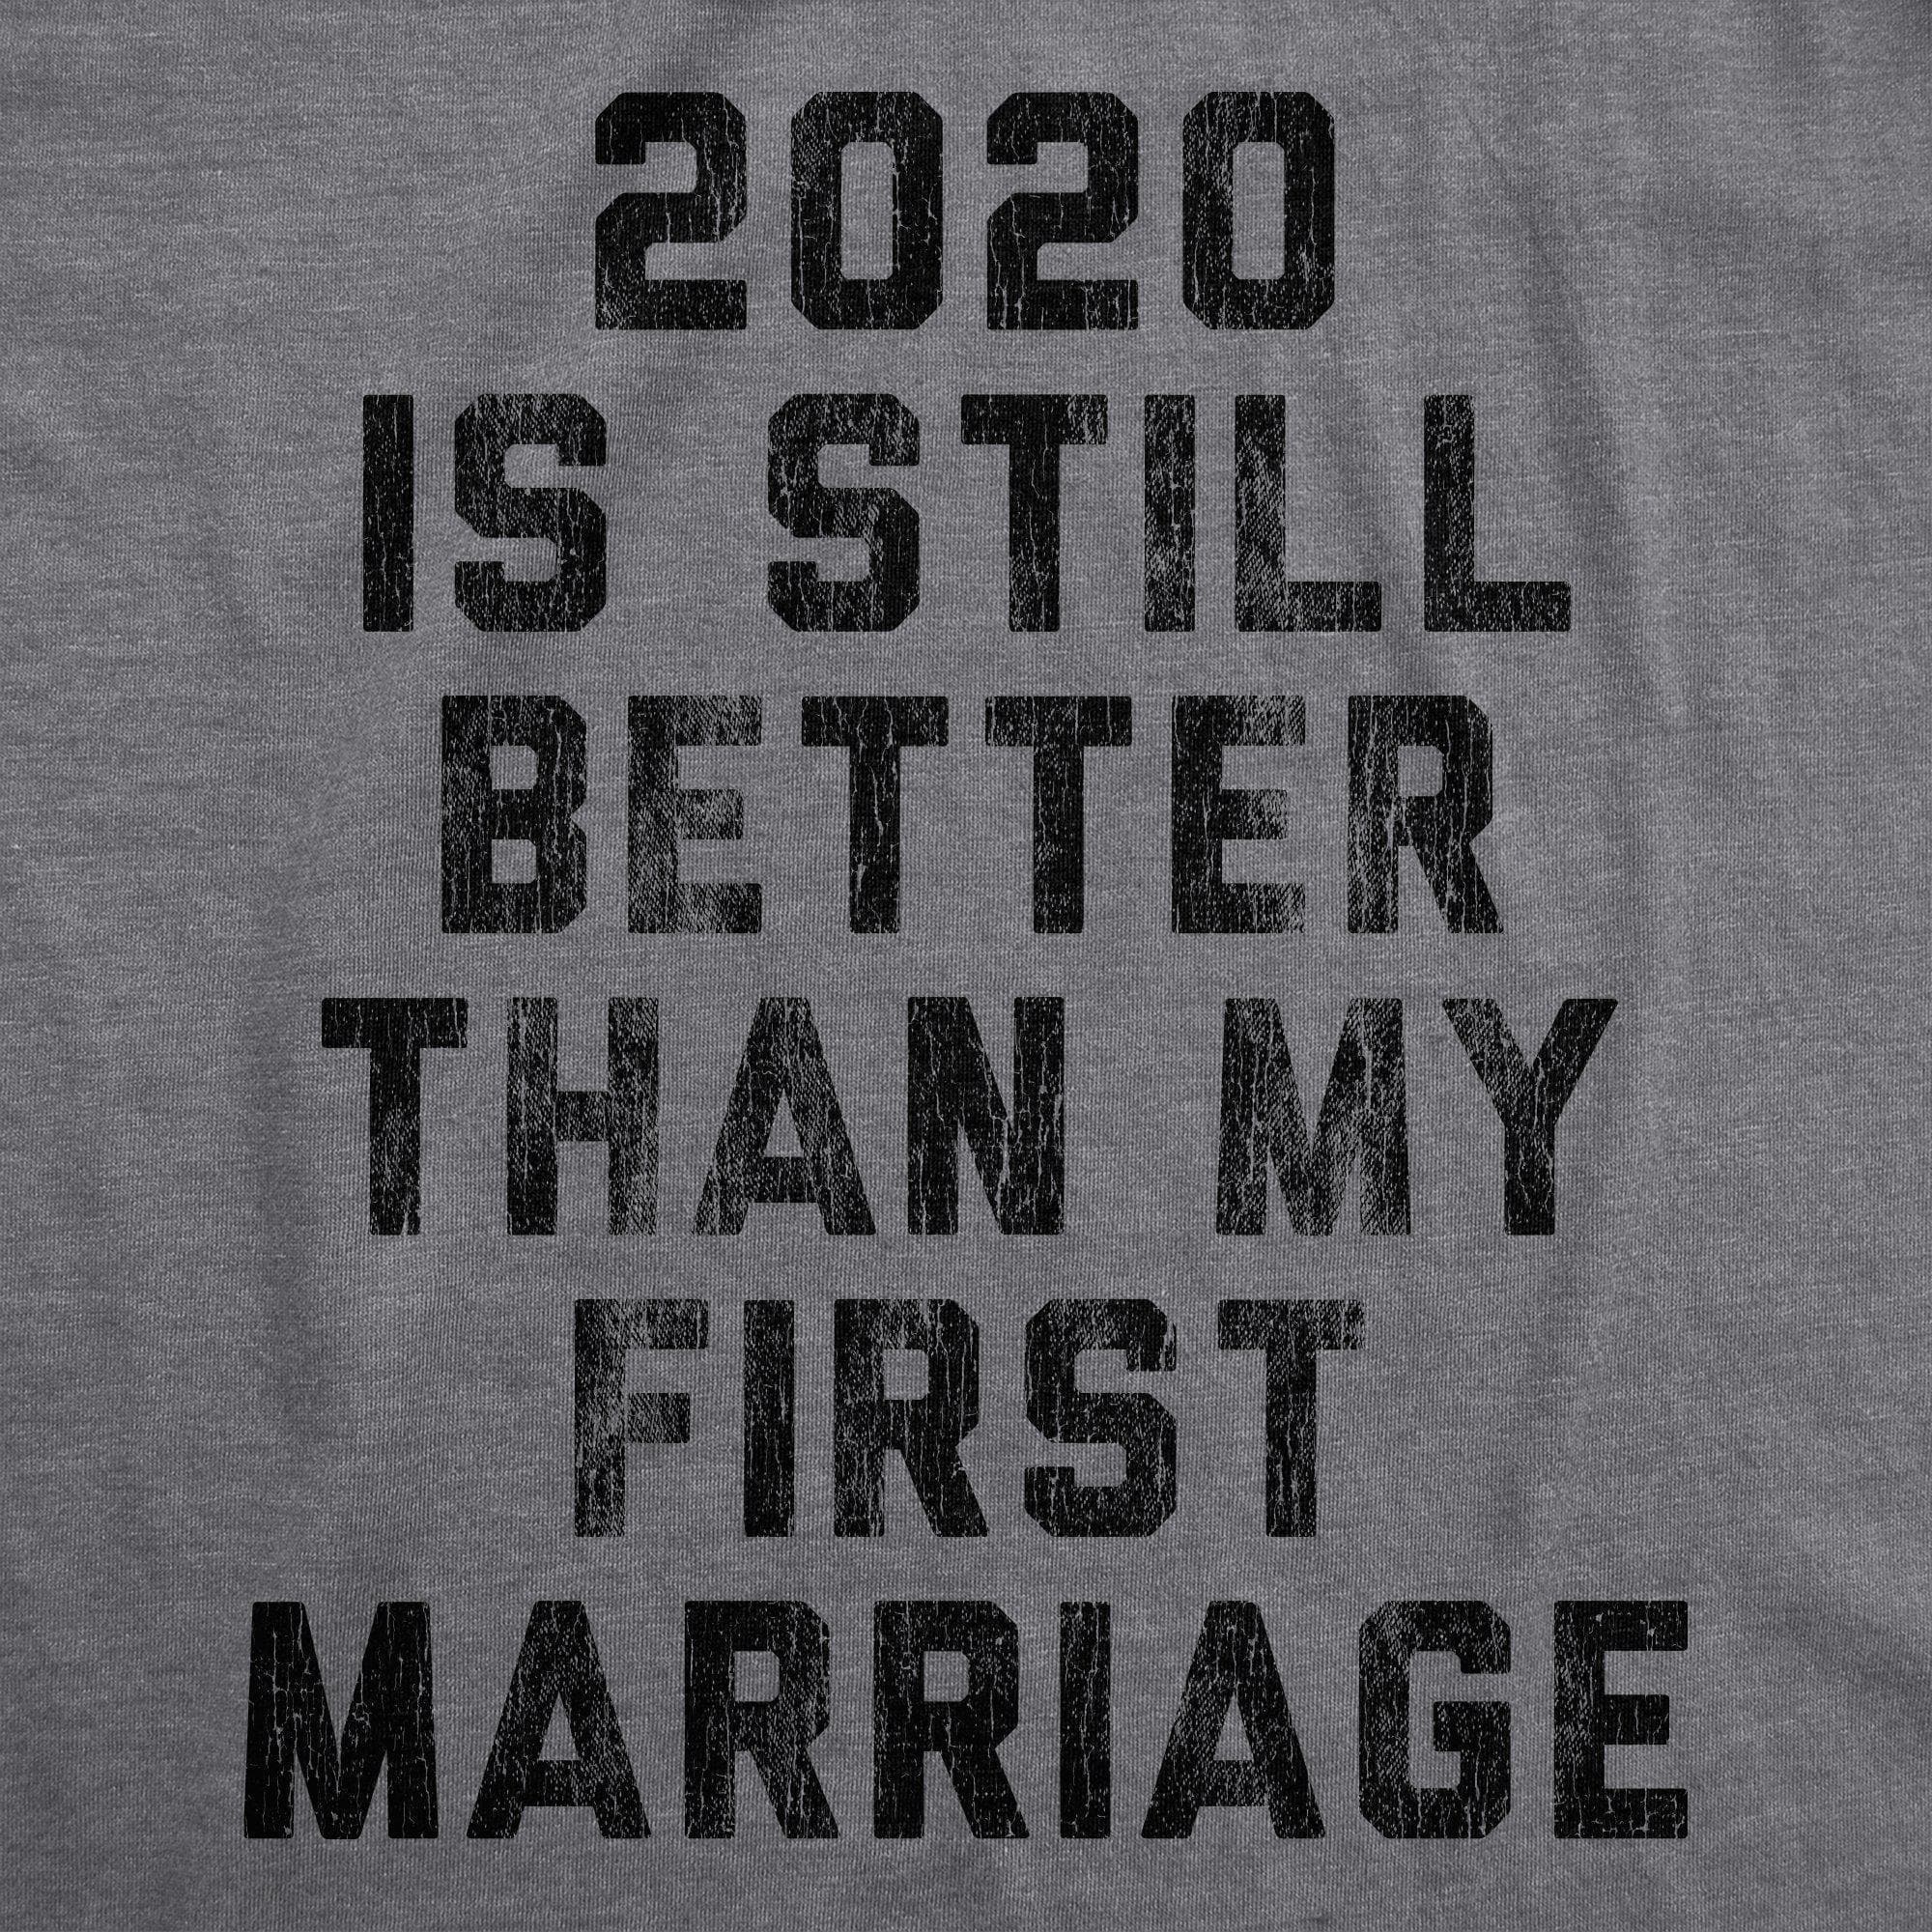 2020 Is Still Better Than My First Marriage Men's Tshirt - Crazy Dog T-Shirts